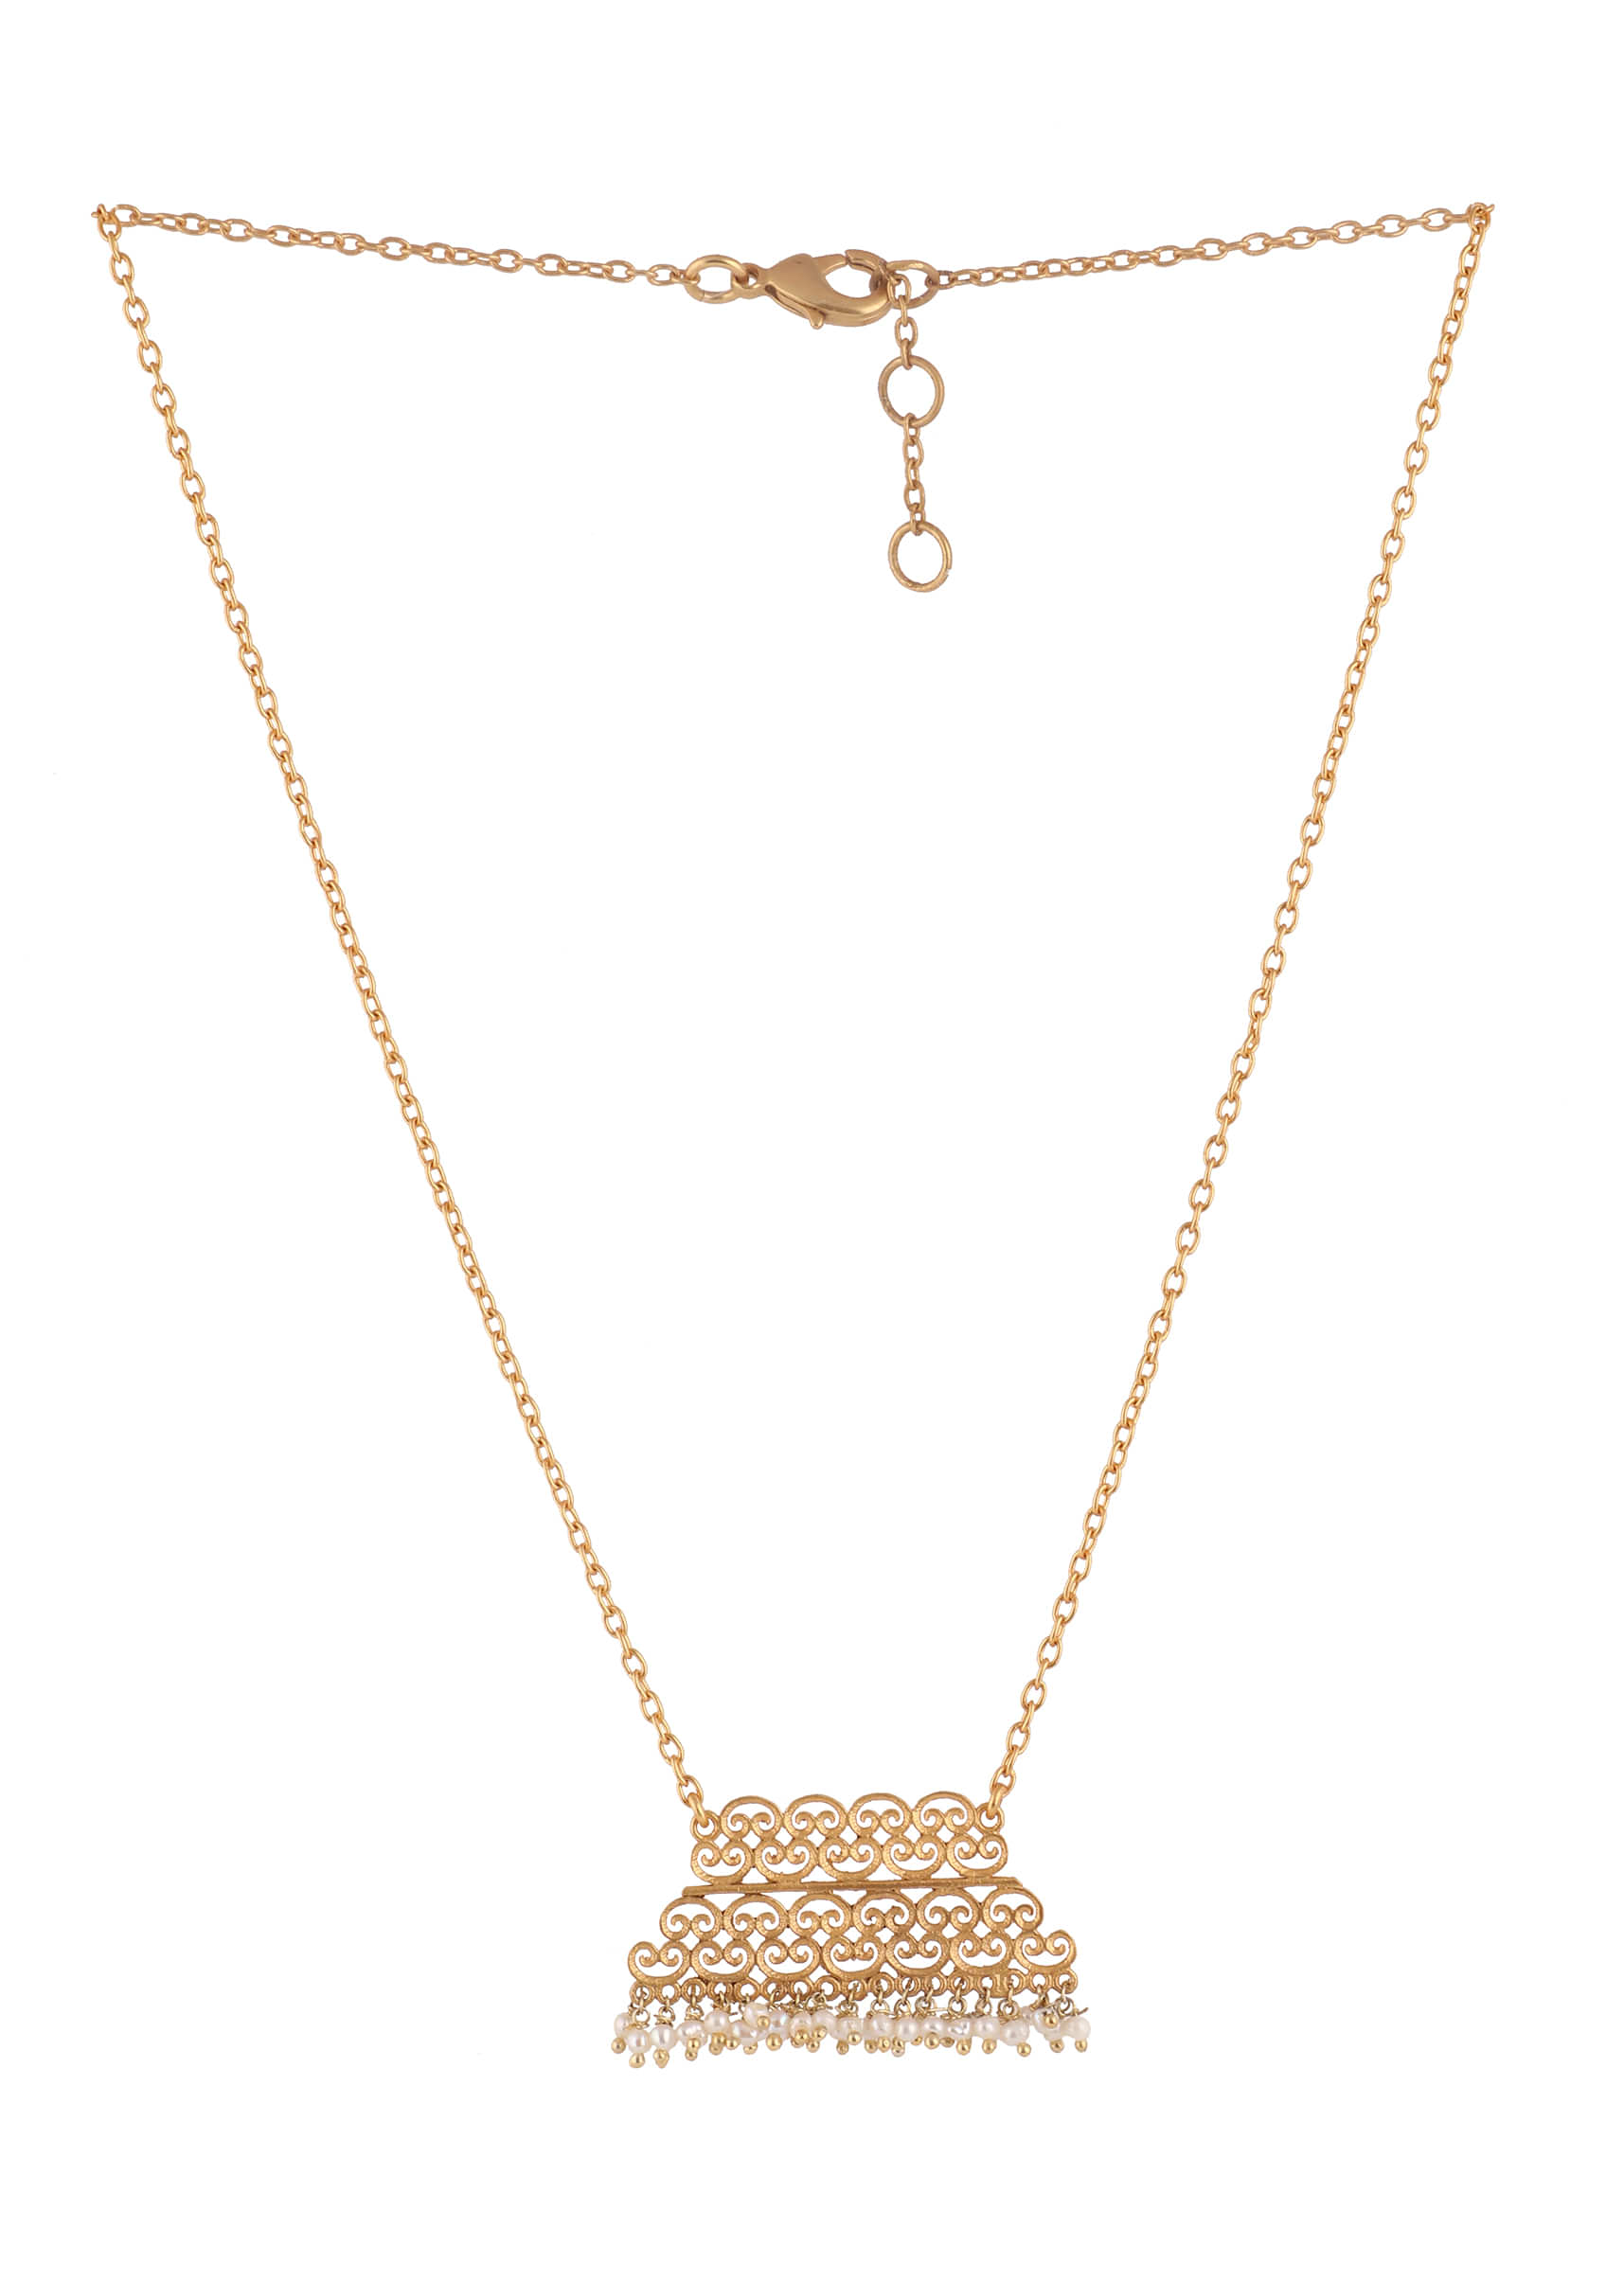 Gold Plated Necklace With Geometric Filigree Pendant Edged In Moti By Zariin